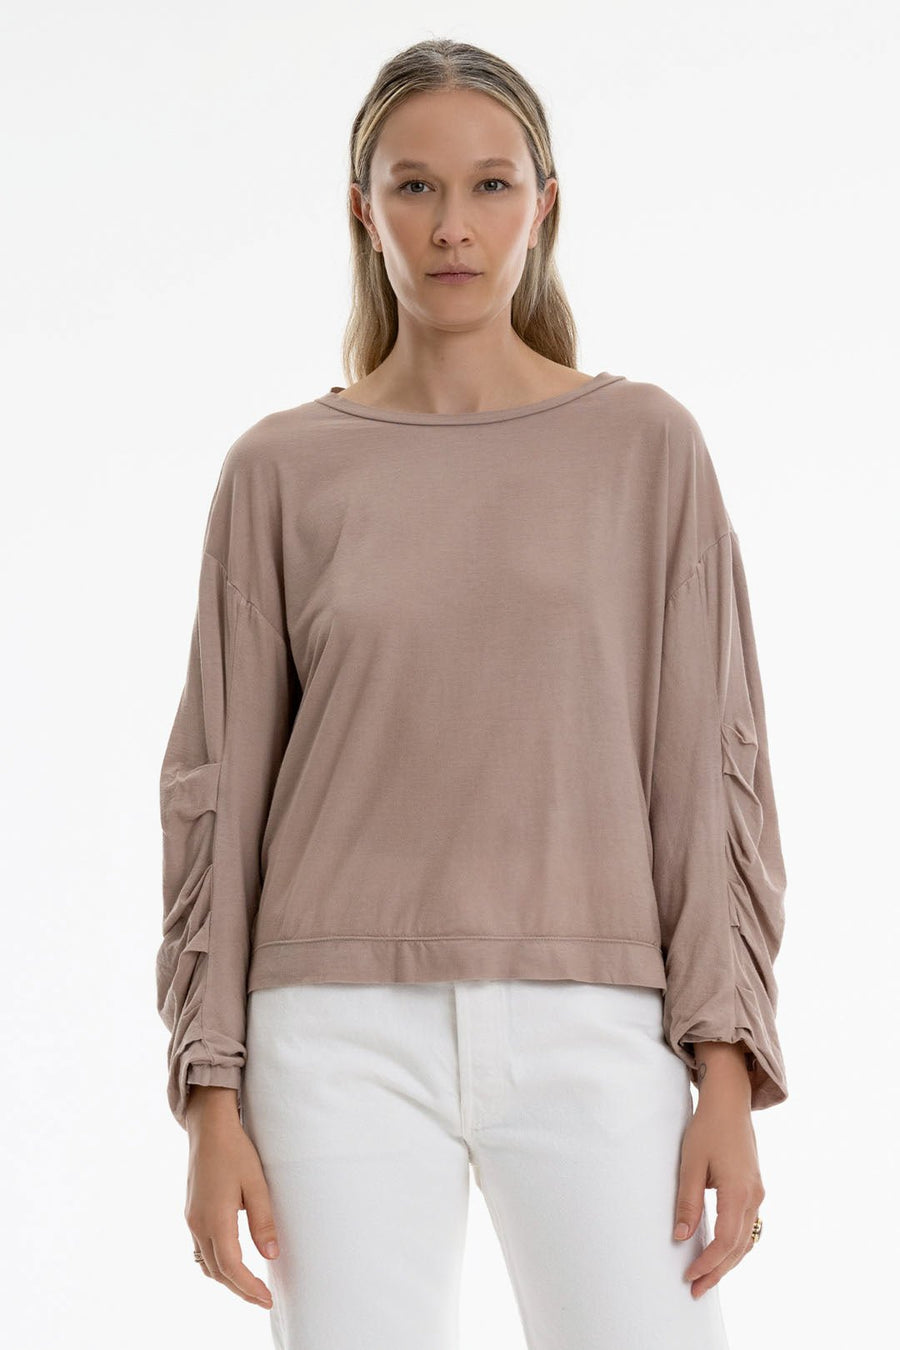 P.C.H. ROUCHED SLEEVE SHIRT, DUNE - Burning Torch Online Boutique